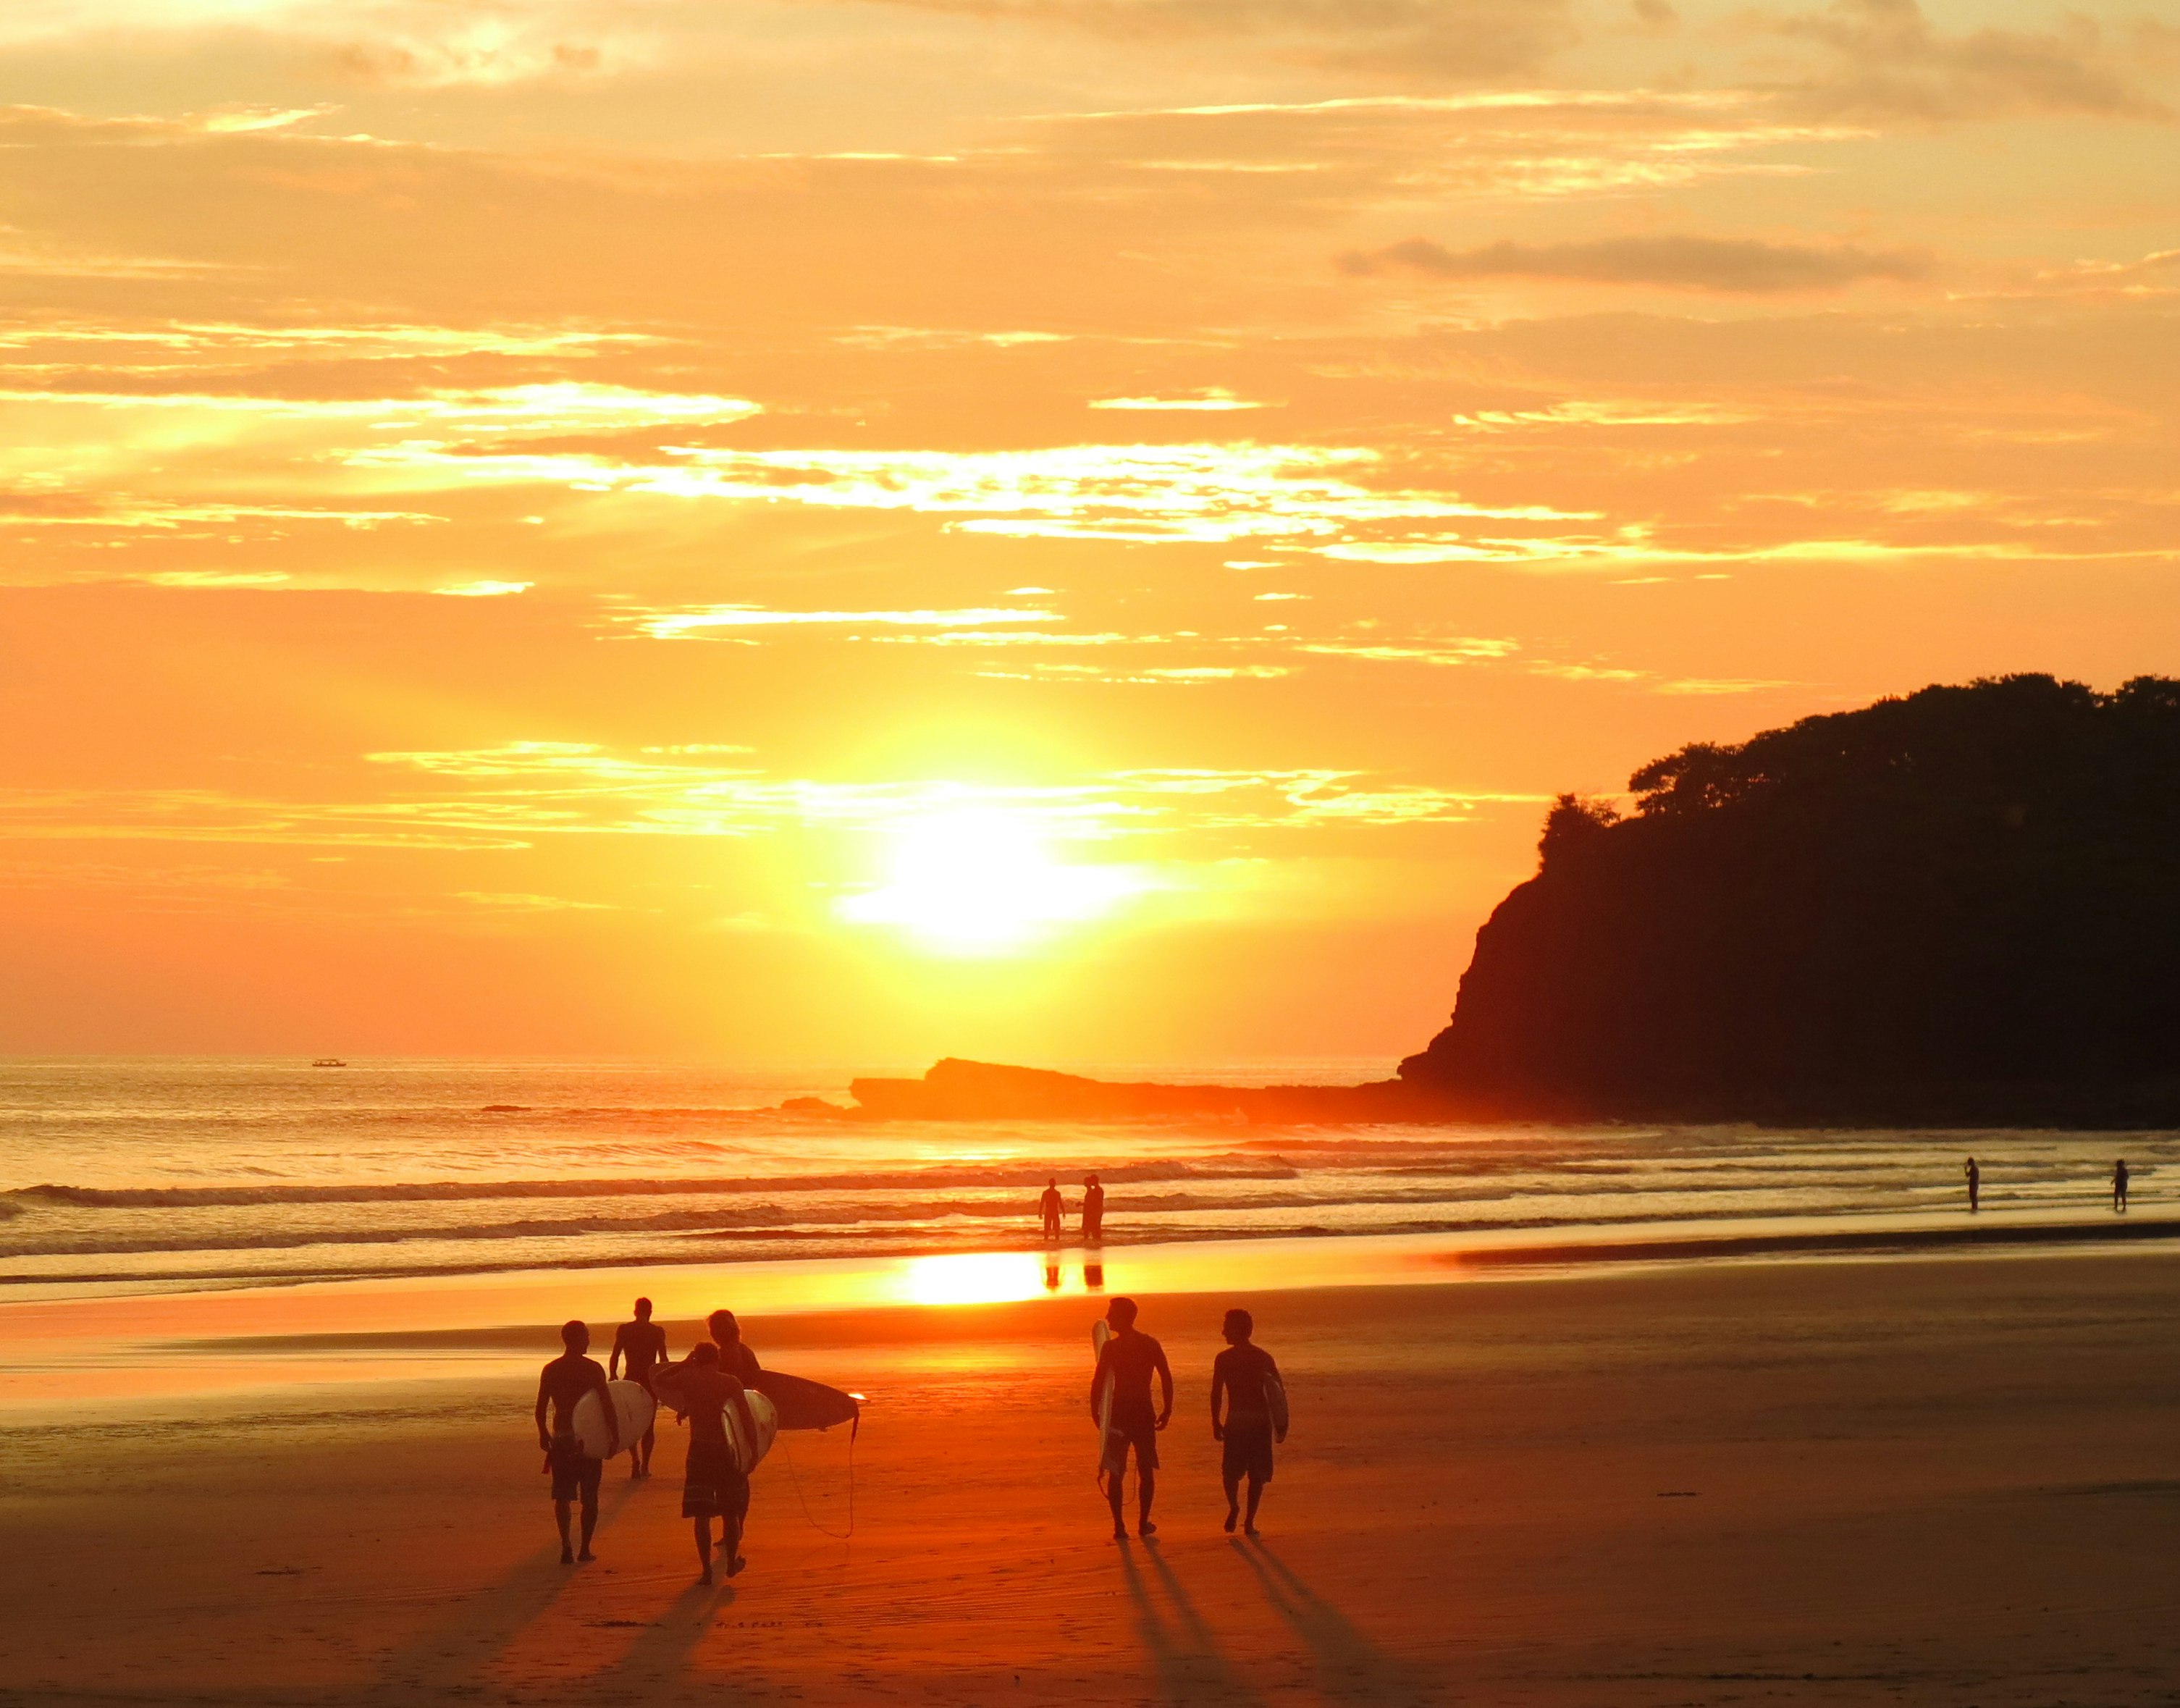 A group of surfers holding surf boards walk toward the water as sun creates a golden glow on the water and the sand; Nicaragua best beaches